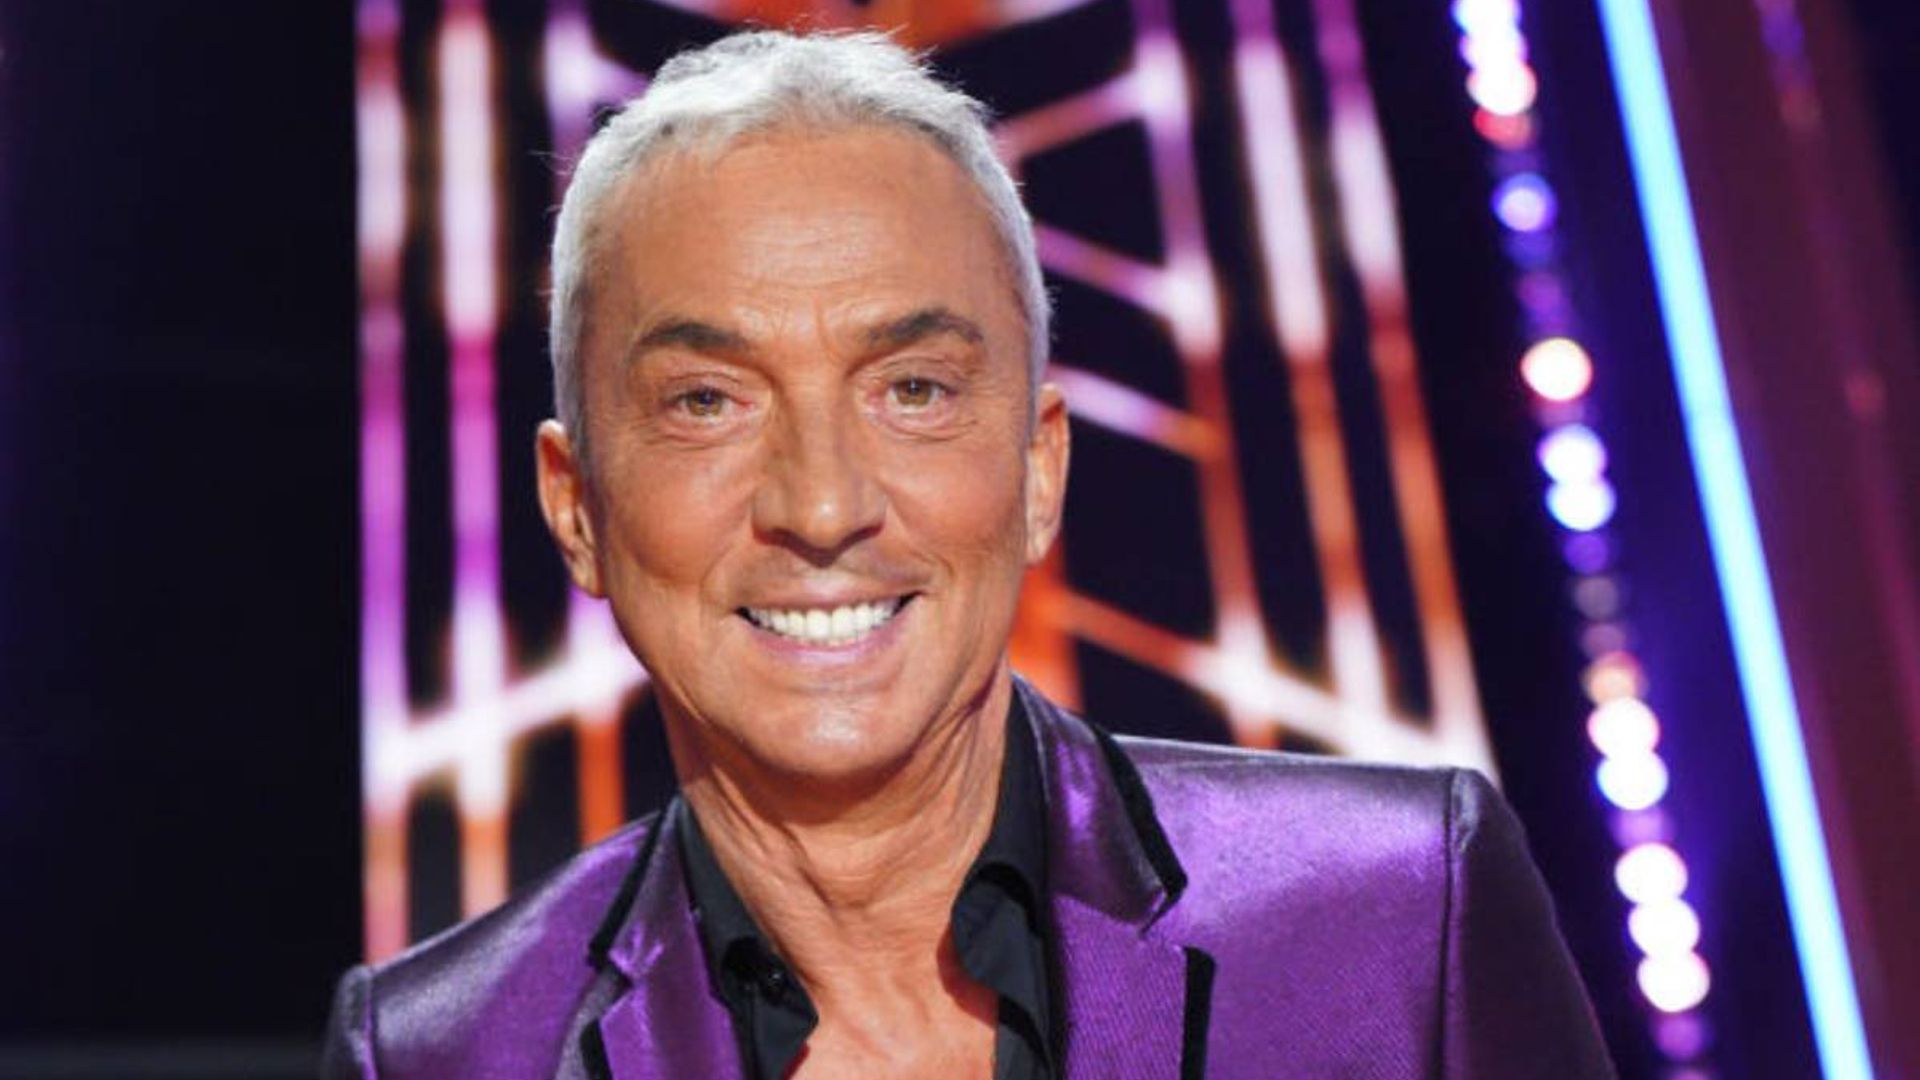 DWTS judge Bruno Tonioli puts on a dazzling display in magical throwback photo